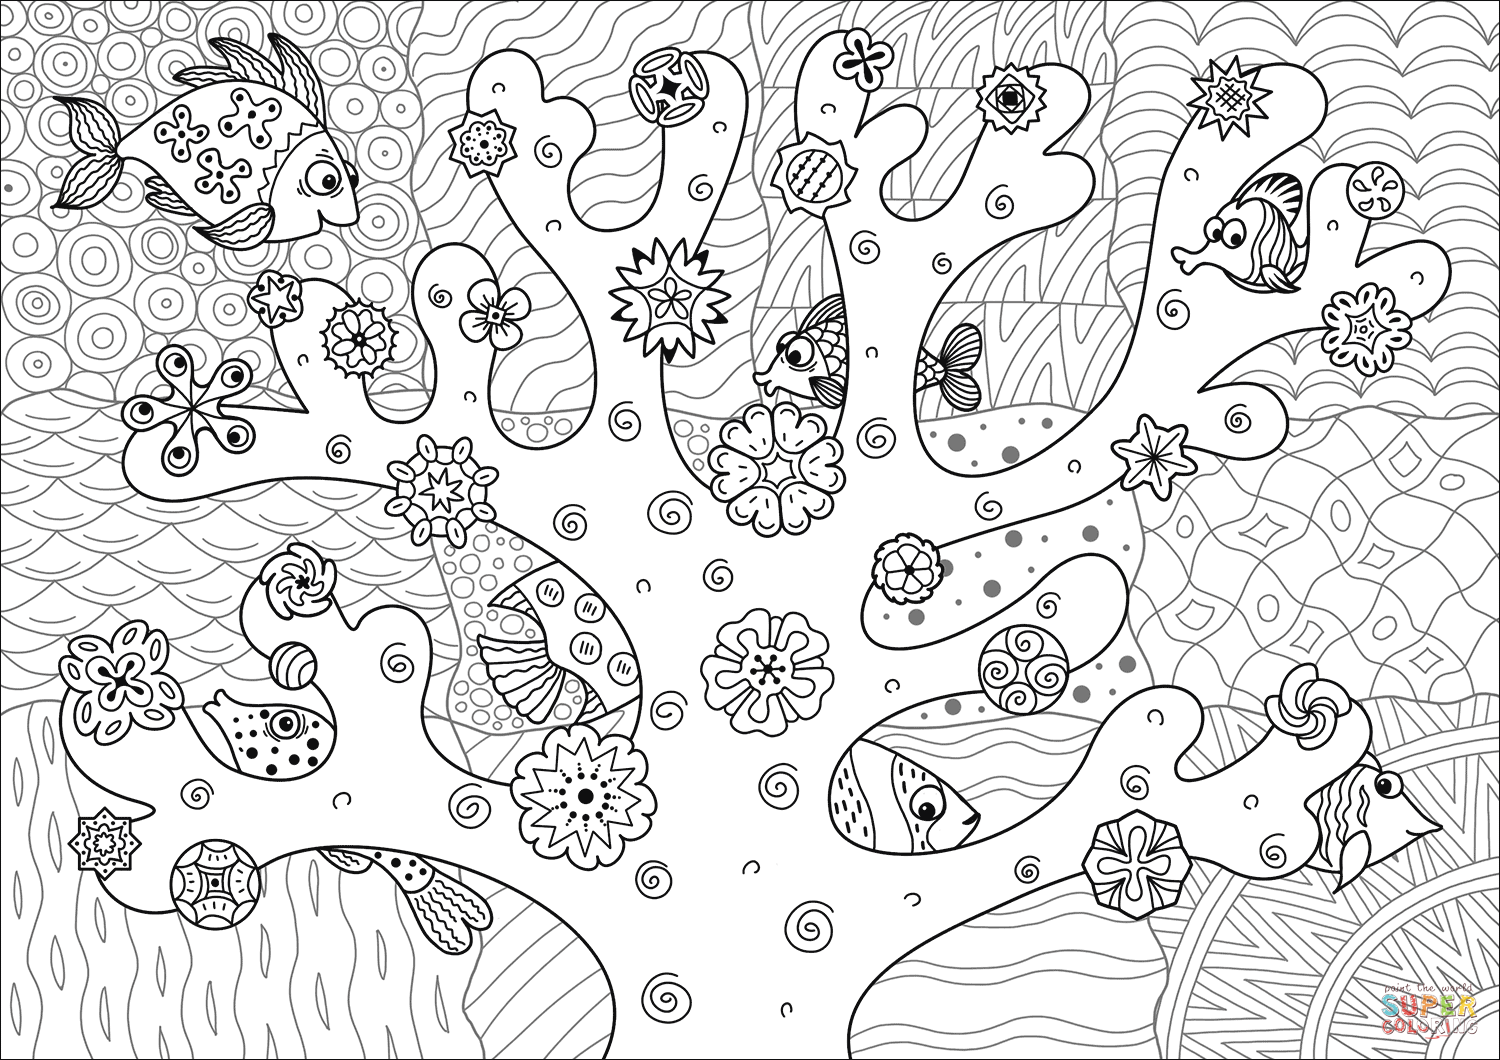 Find fish hidden in the coral reef coloring page free printable coloring pages